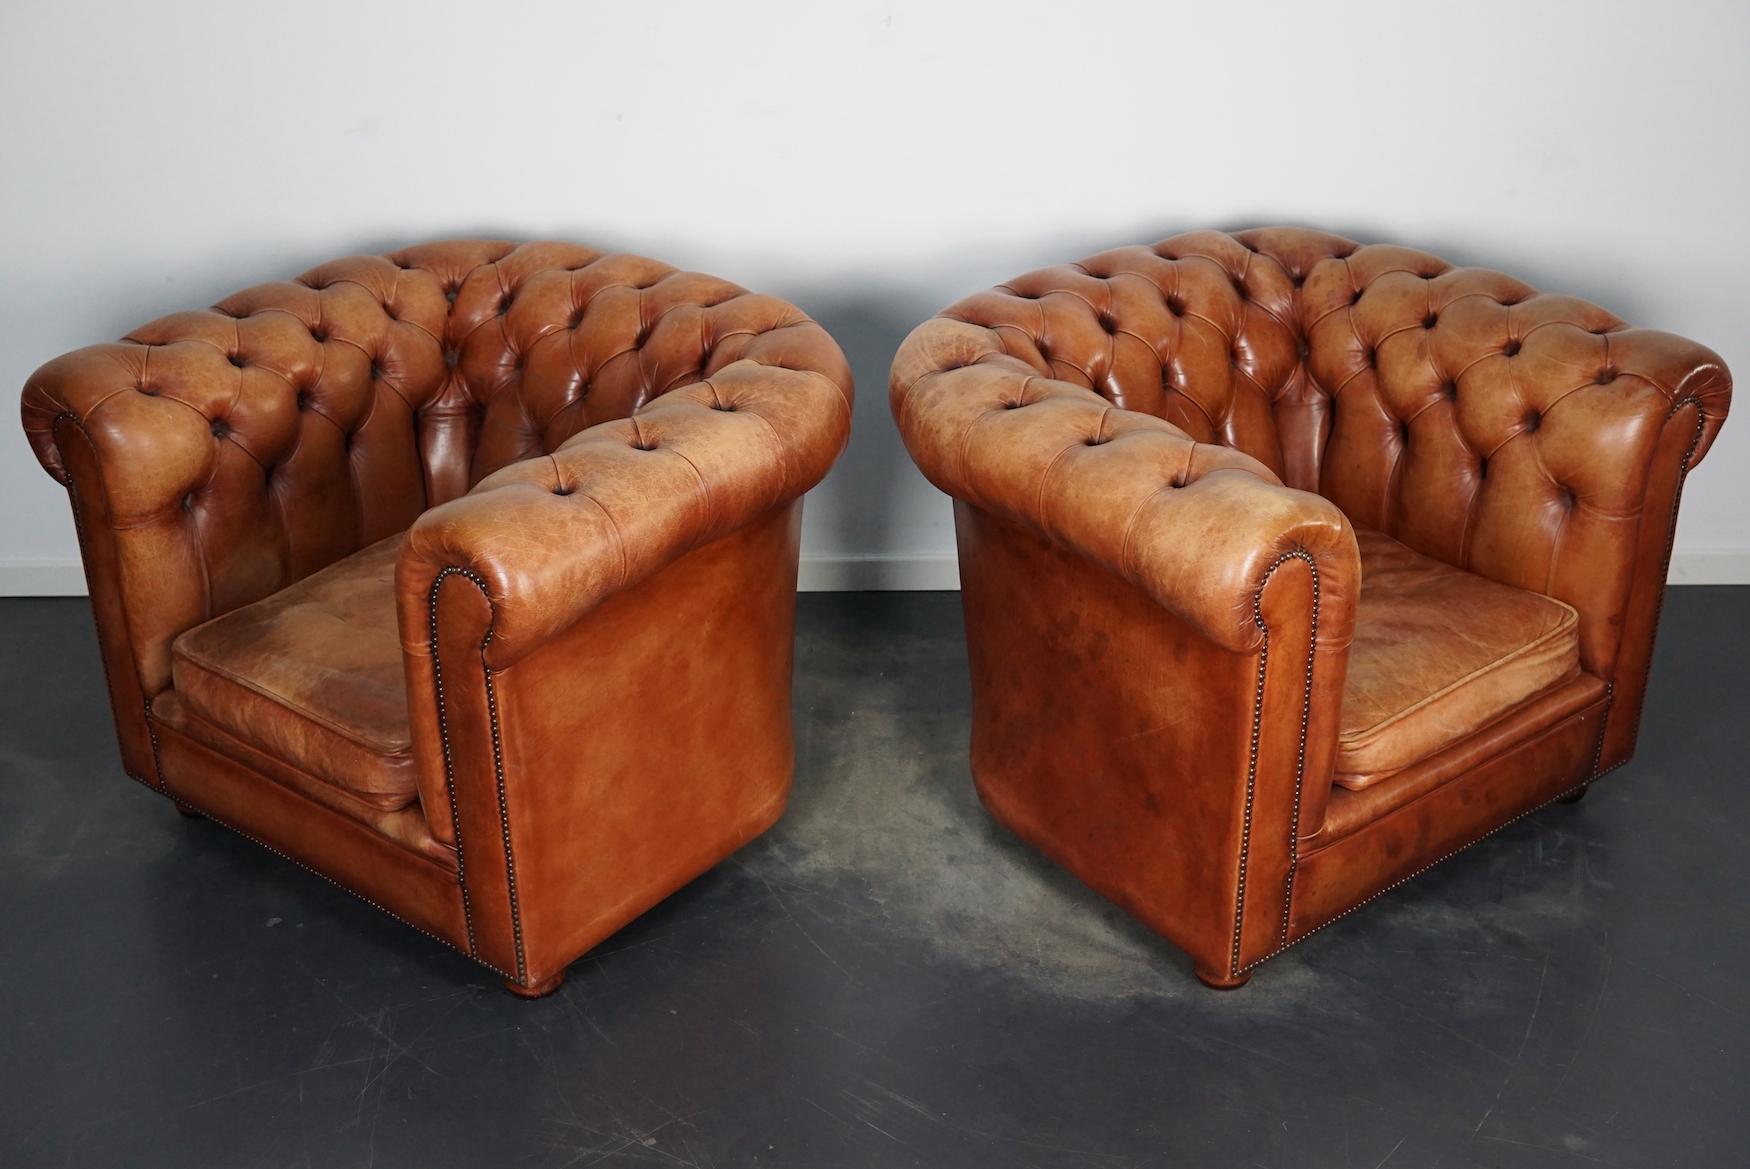 Industrial Vintage Dutch Cognac Leather Chesterfield Club Chairs, Set of 2